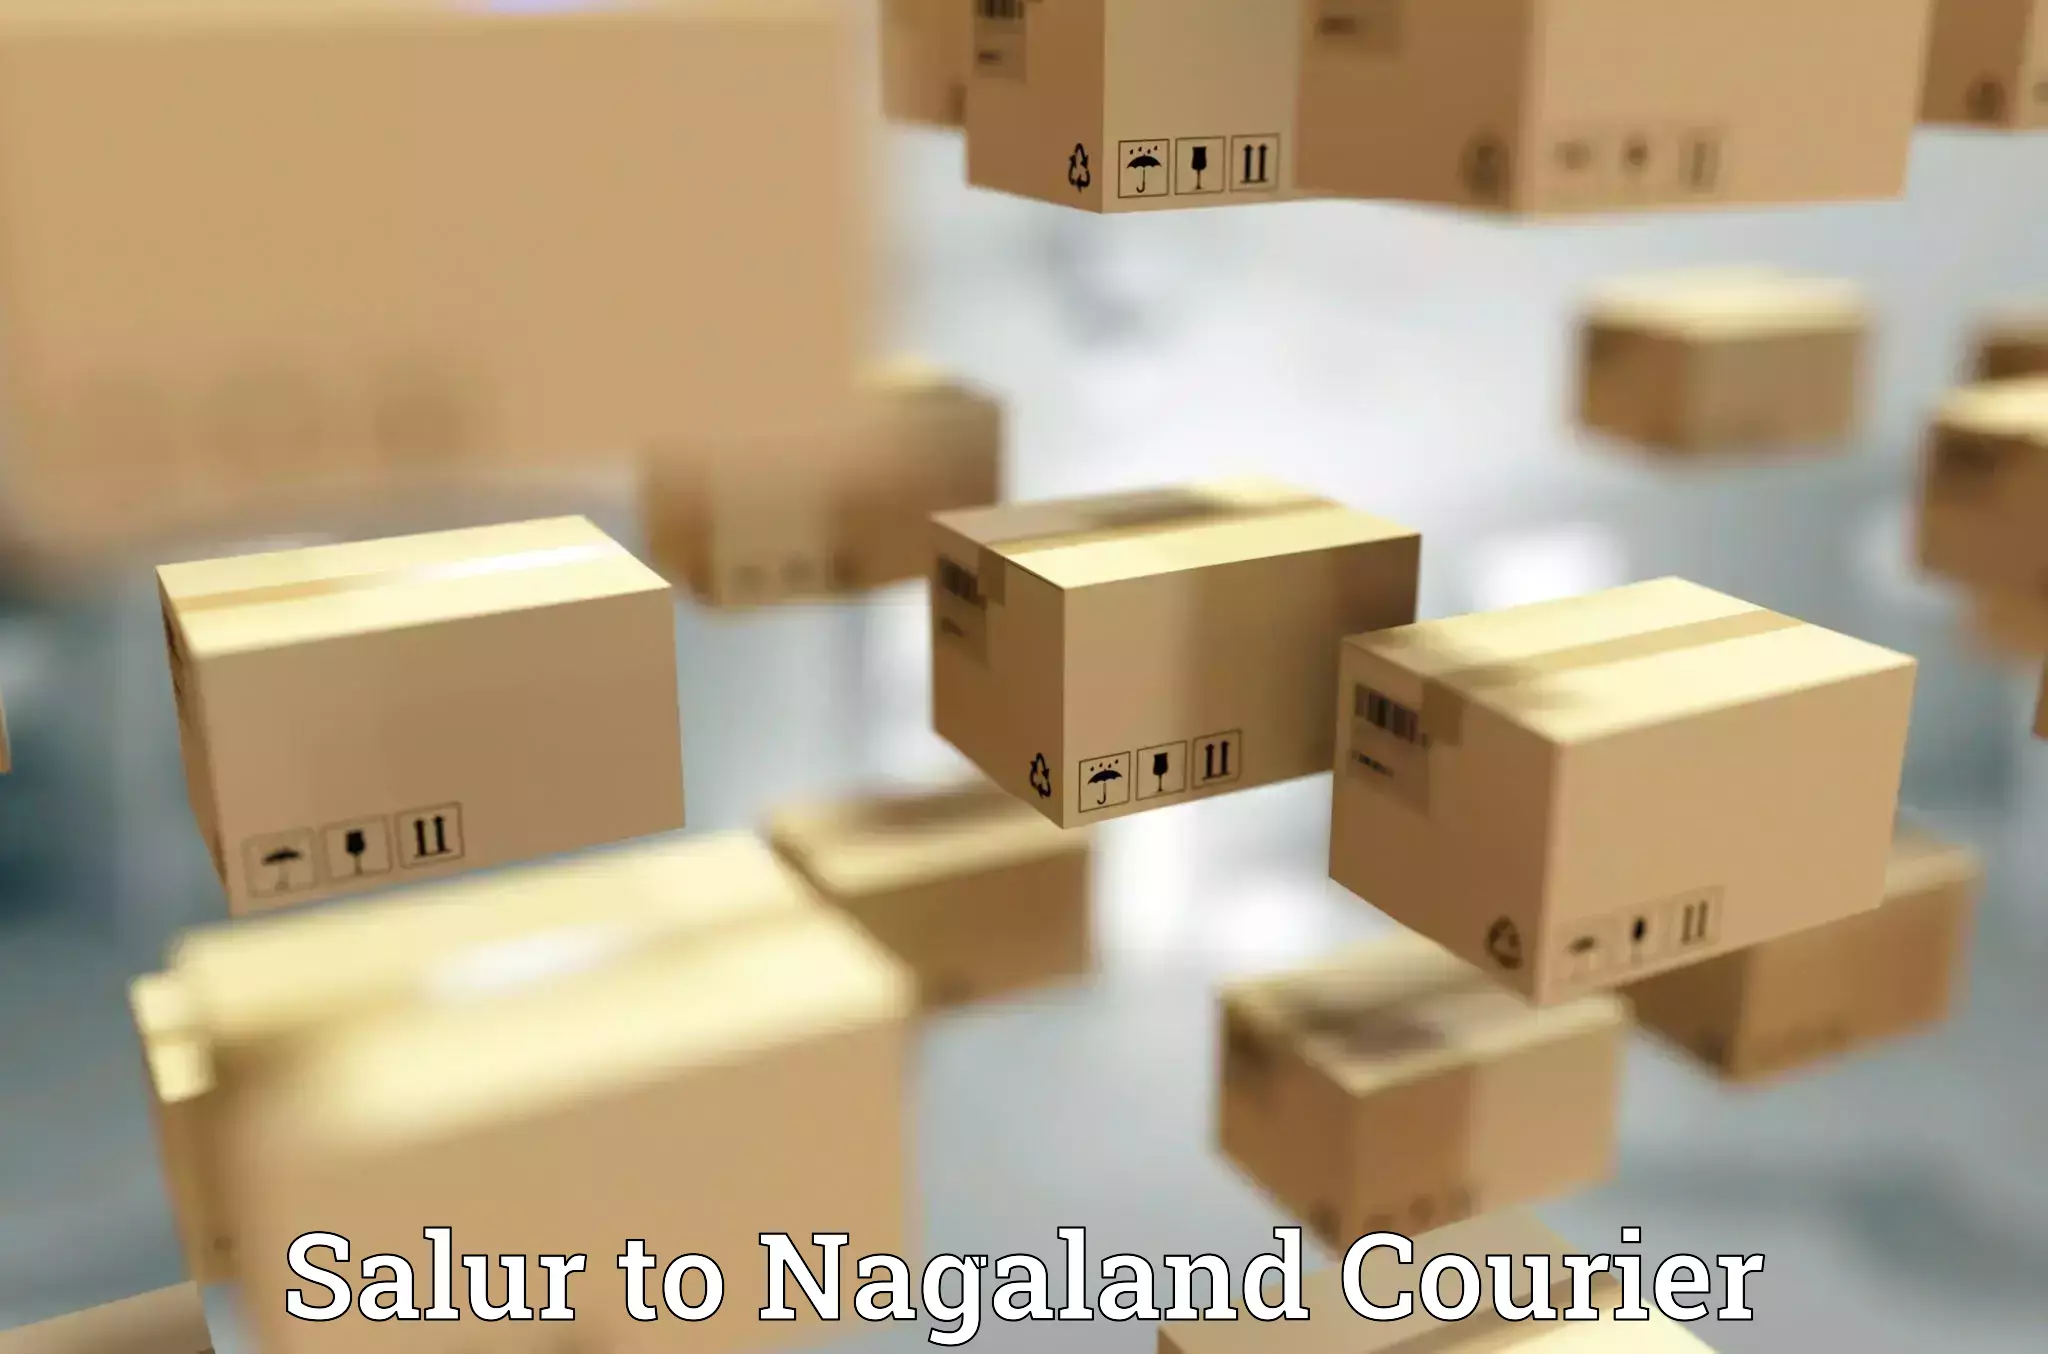 Luggage shipment specialists Salur to Nagaland